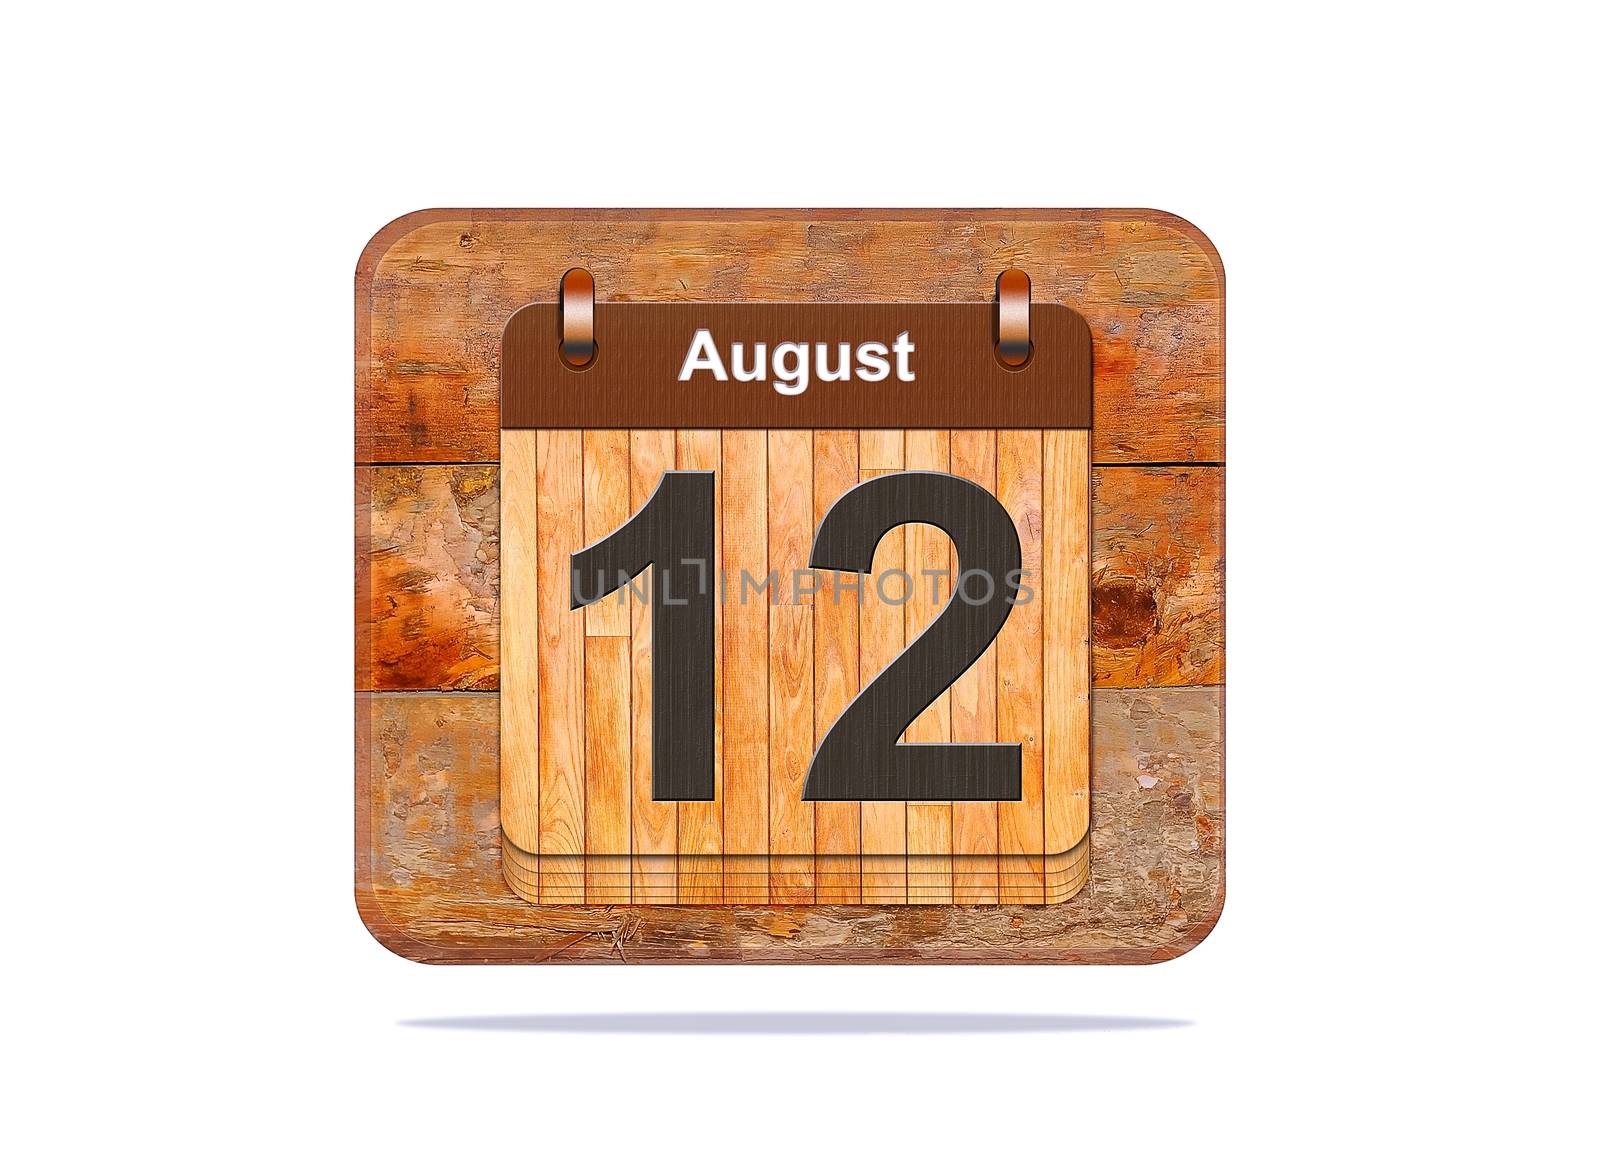 Calendar with the date of August 12.